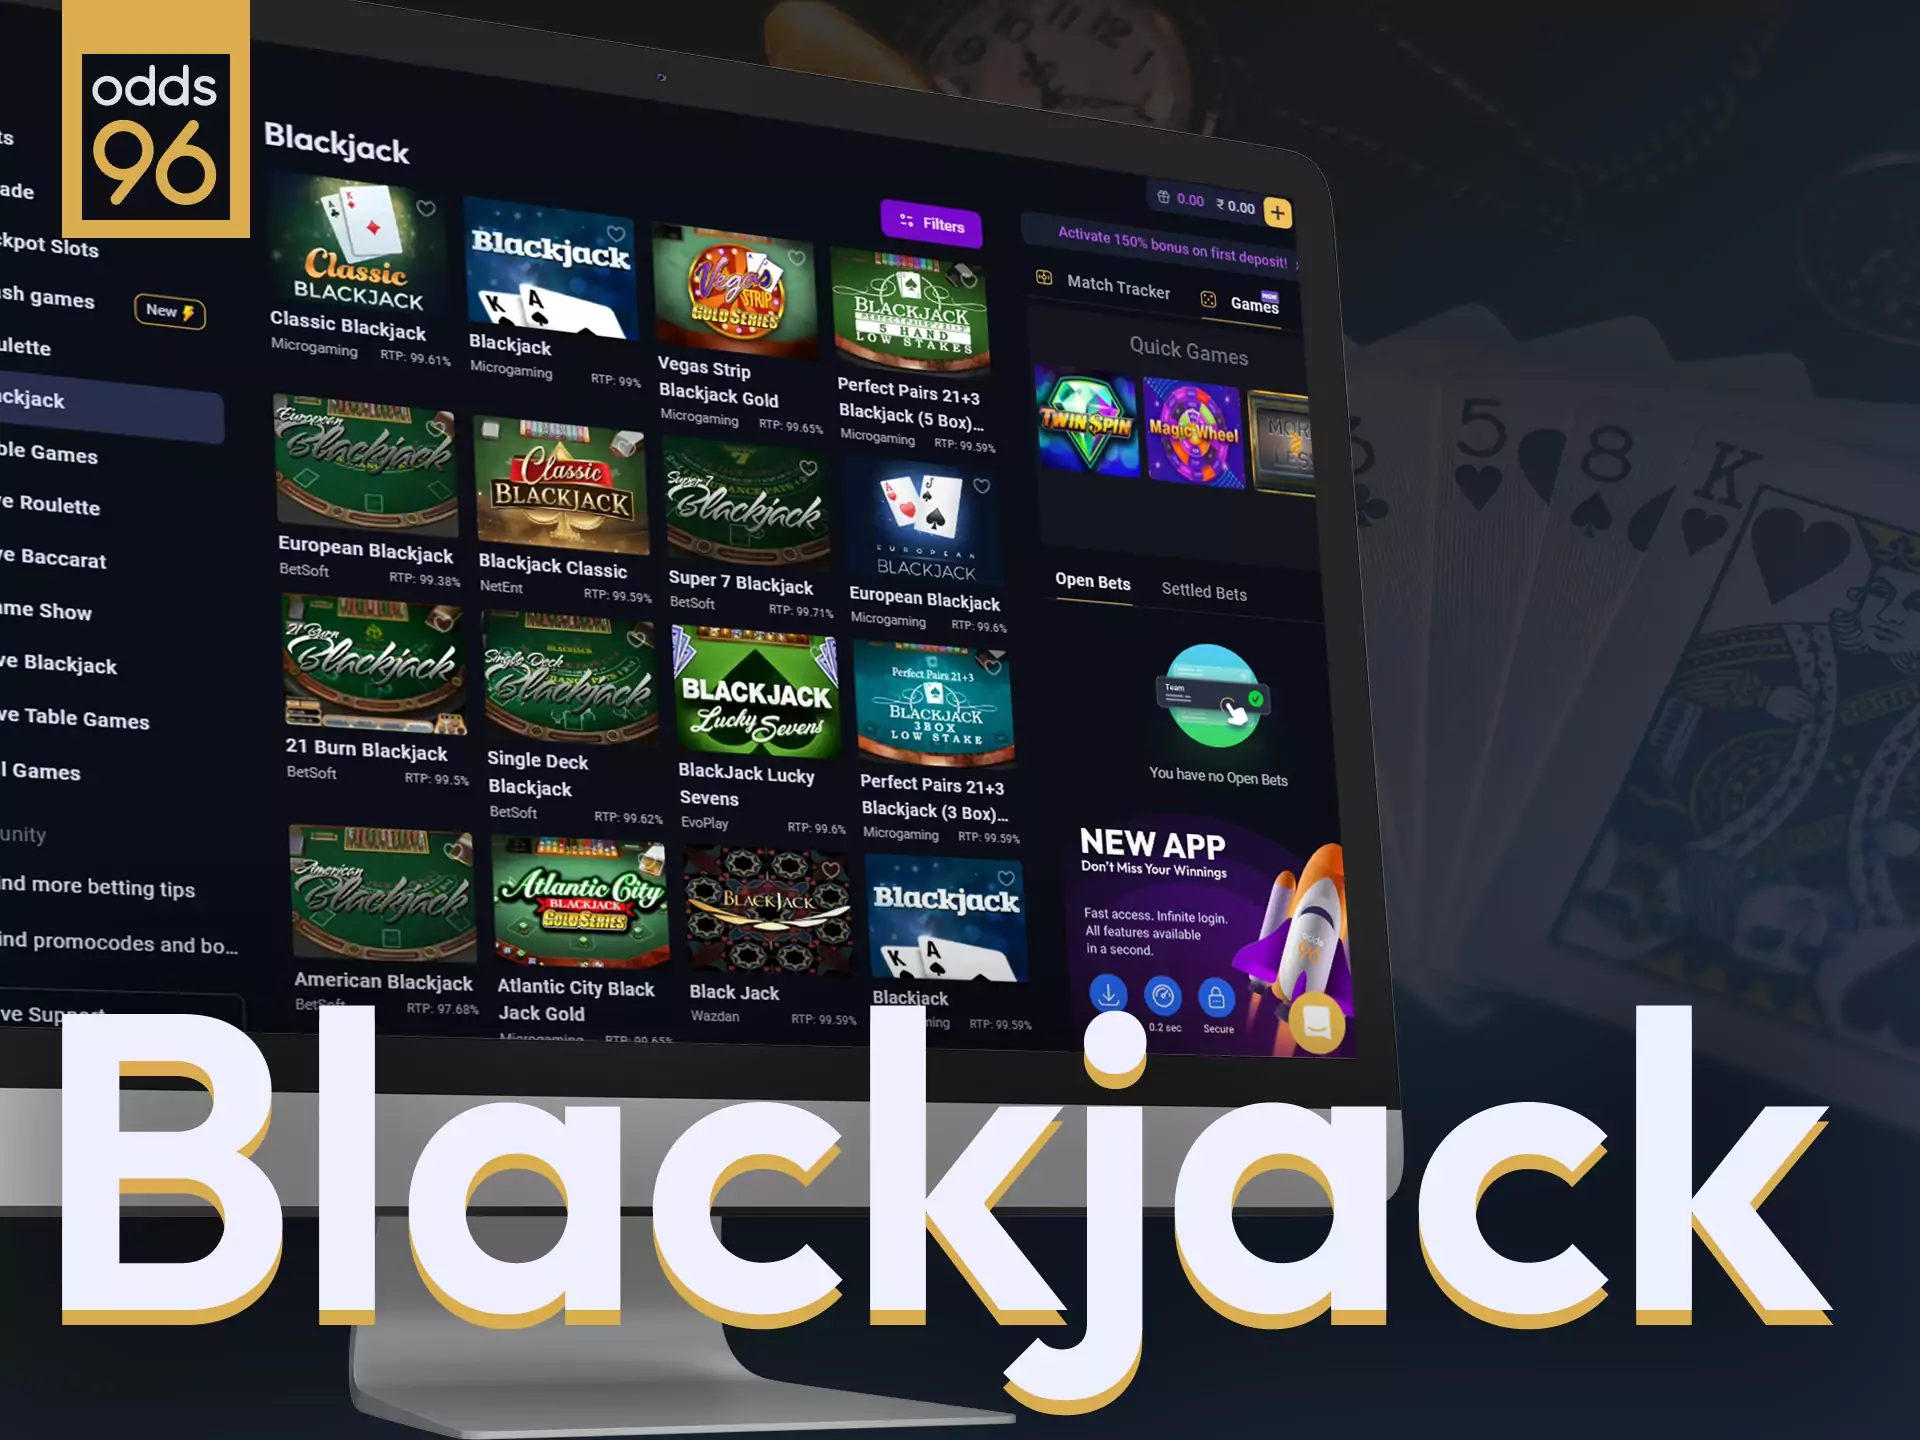 Place bets at Odds96 casino on blackjack.